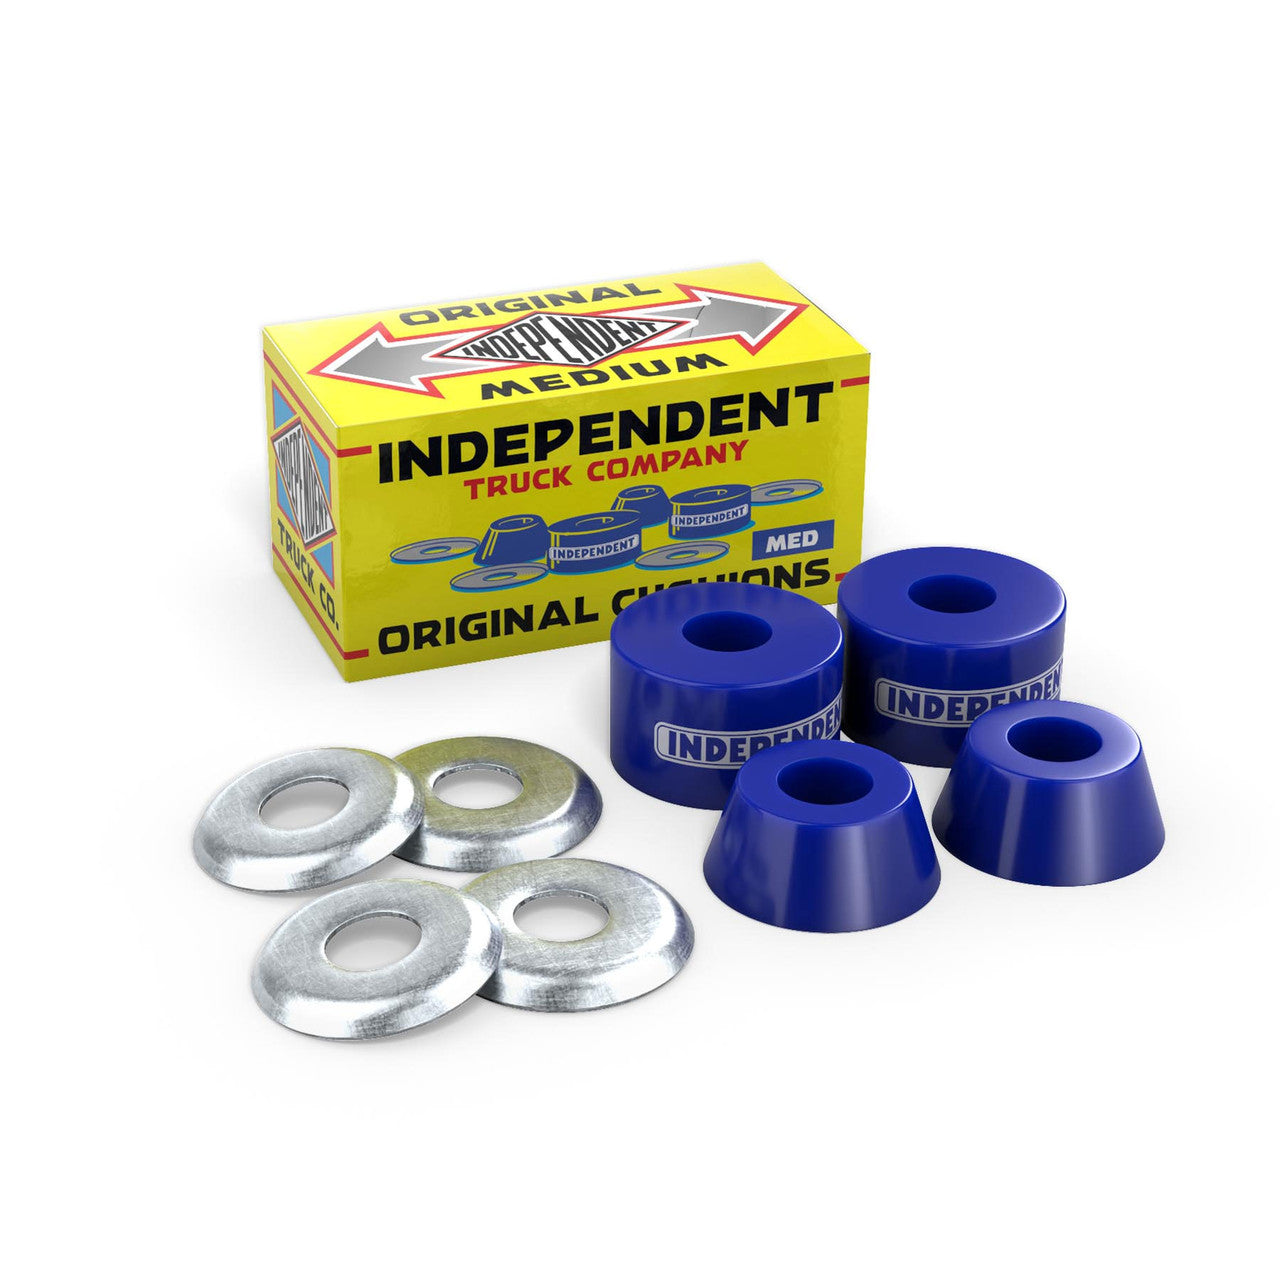 Independent - Stage 1-7 Bushings - Blue - Medium 92a